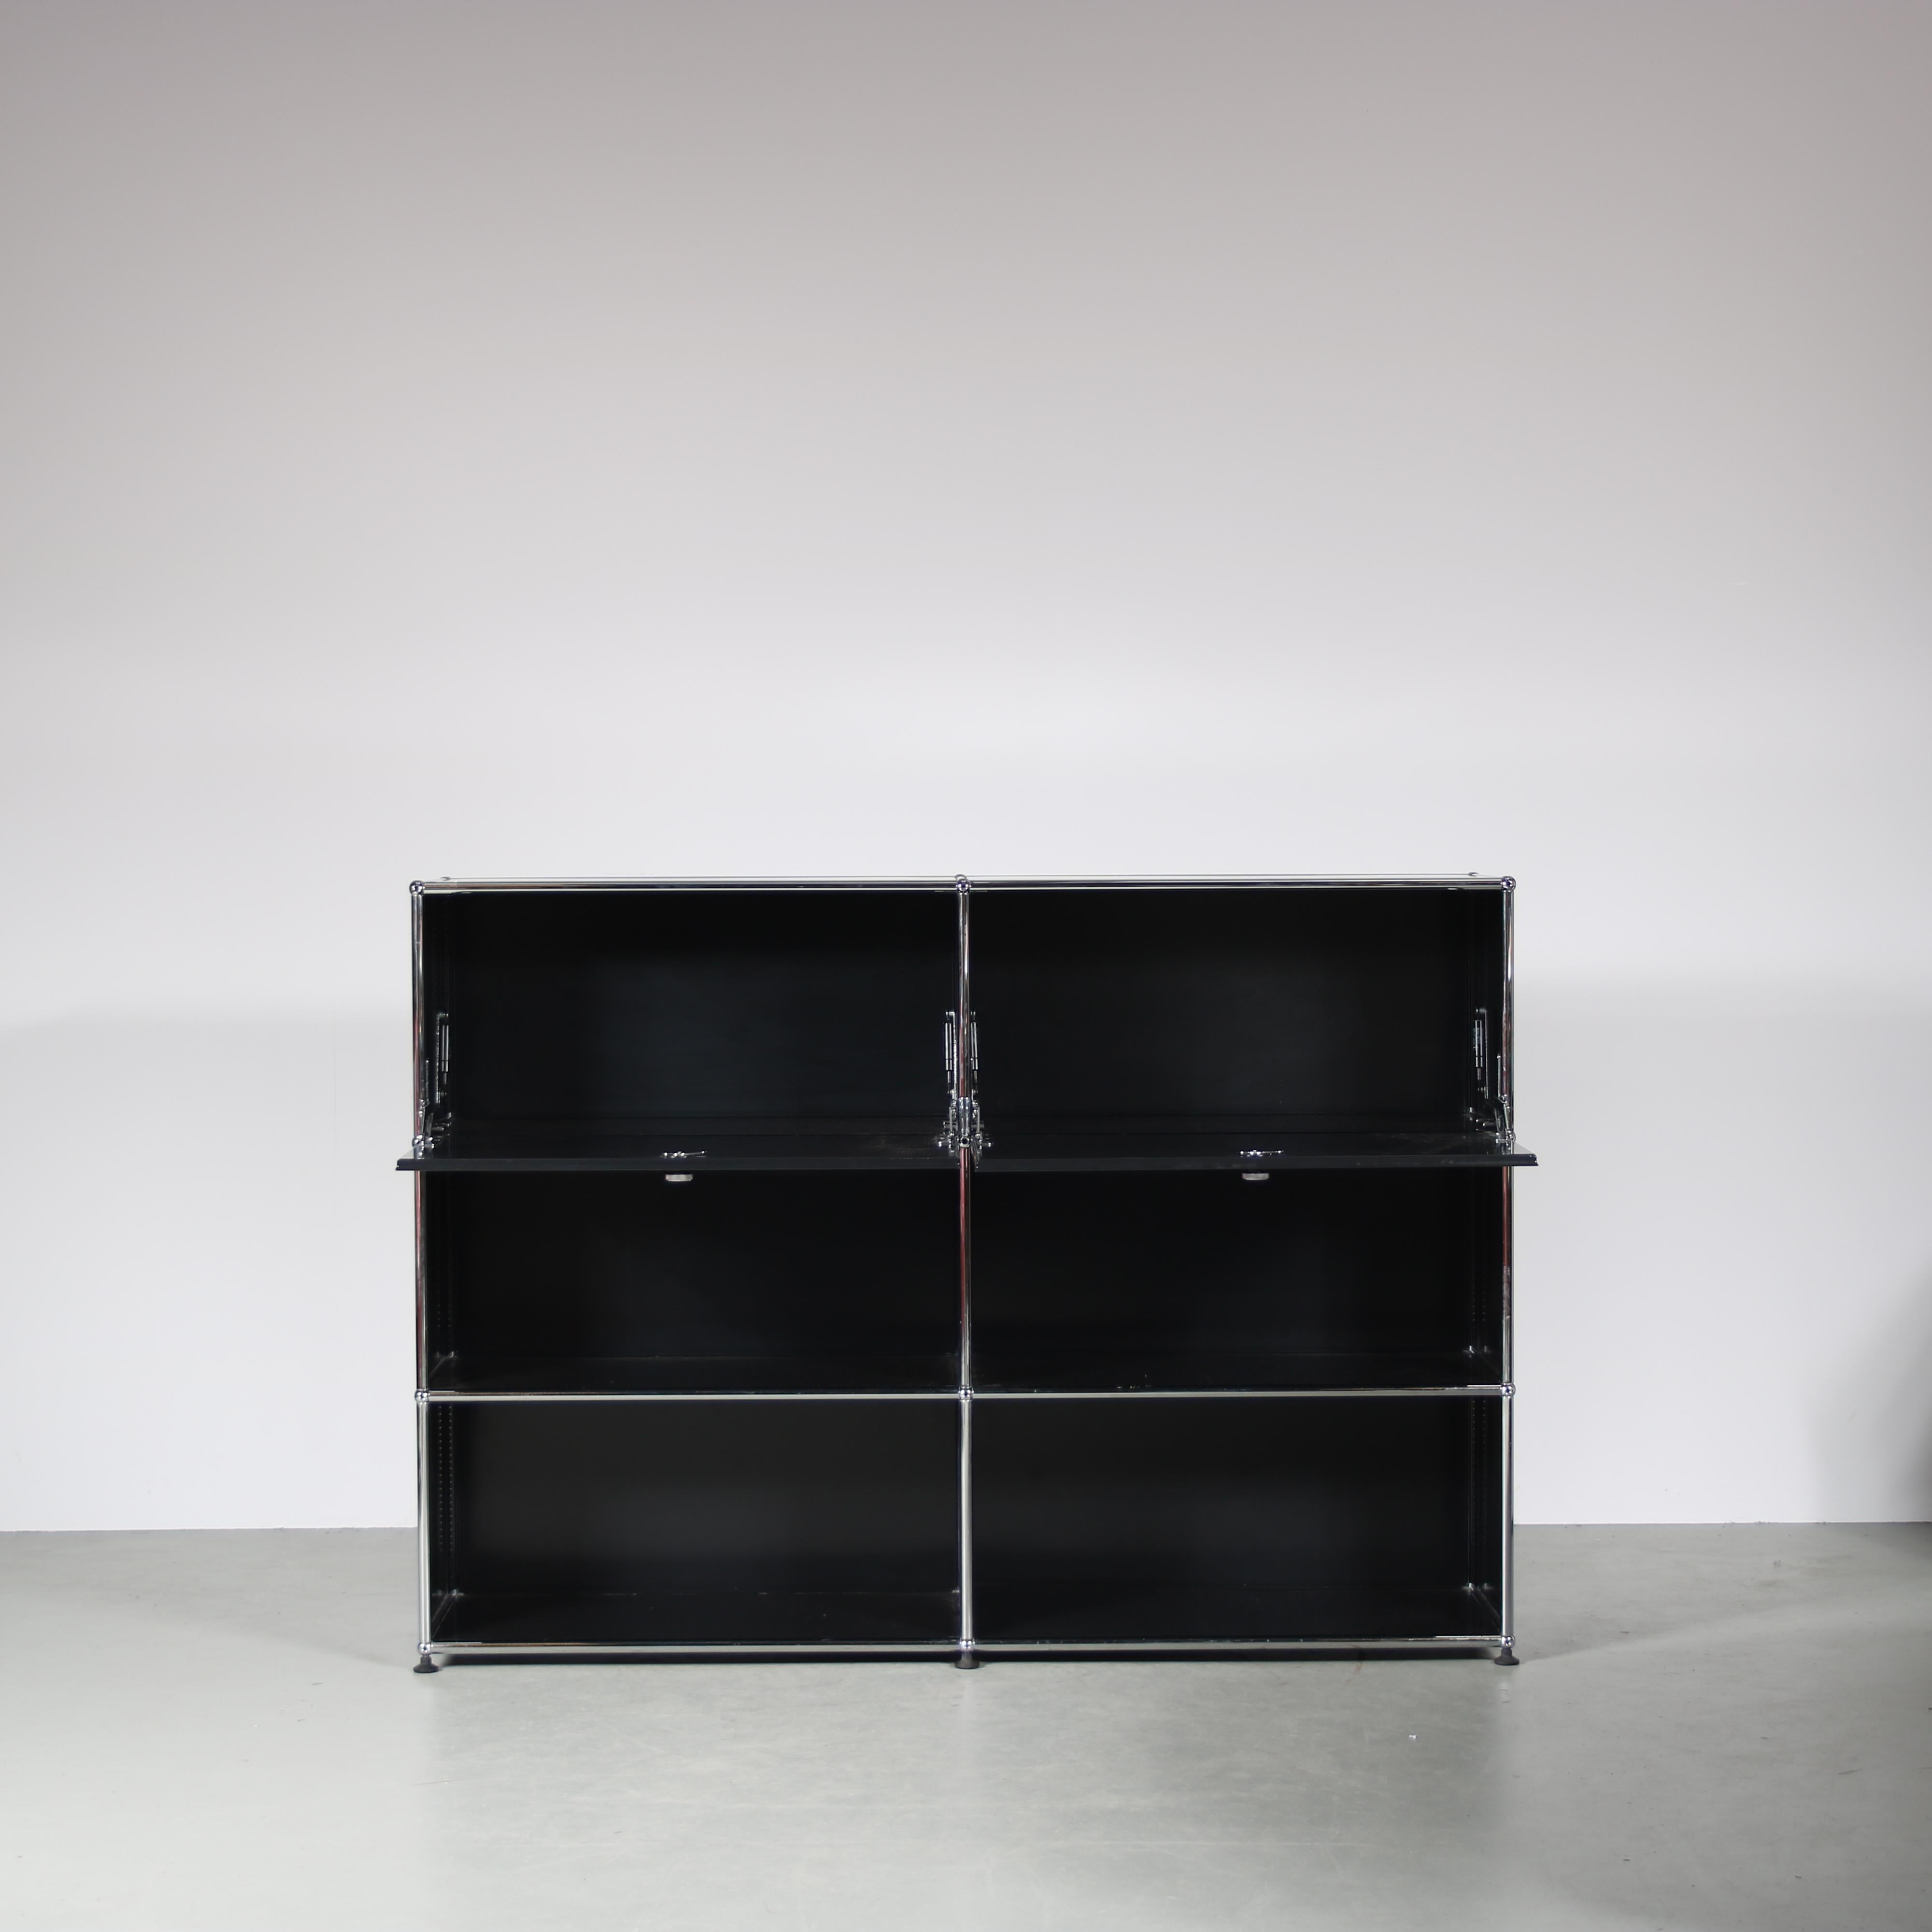 Swiss 1980s Cabinet by Paul Schaerer and Fritz Haller for USM, Switzerland For Sale